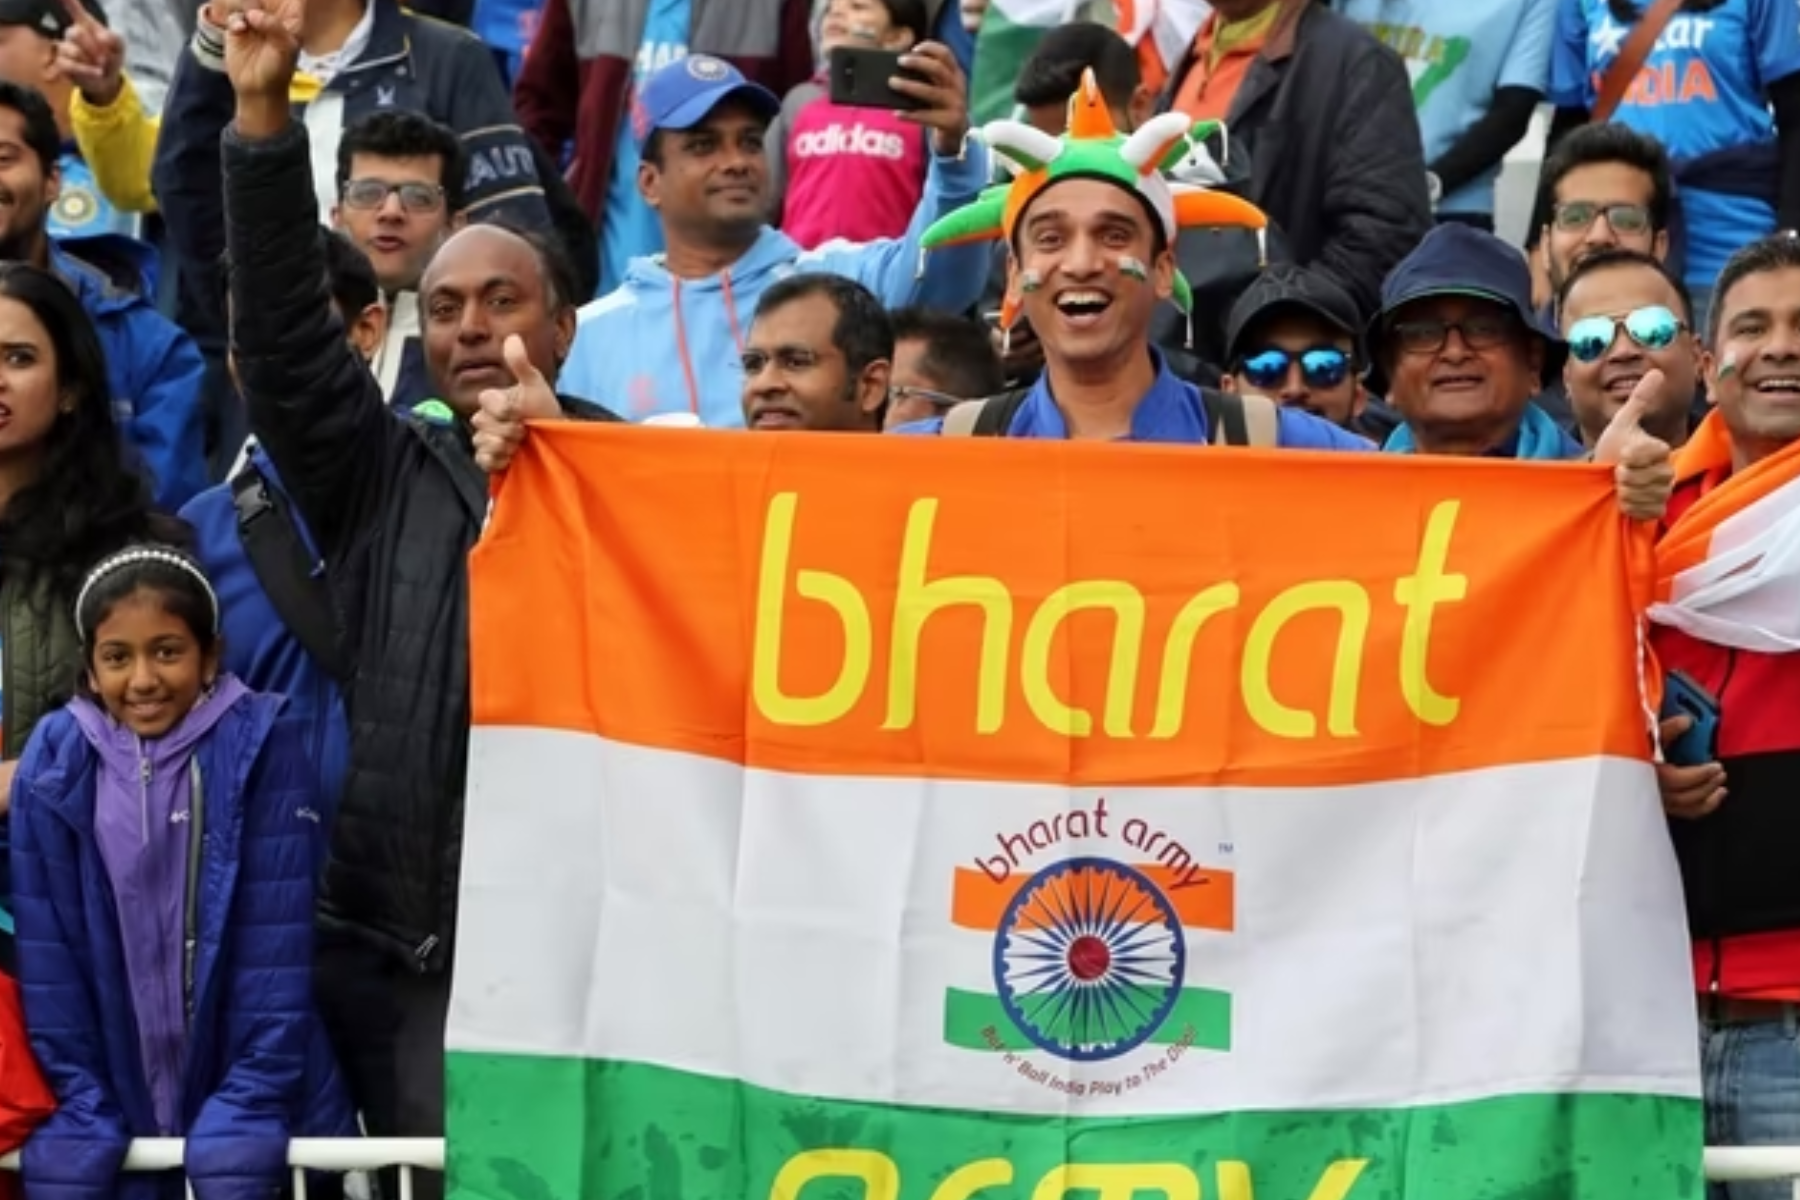 A man holds a Bharat flag in public